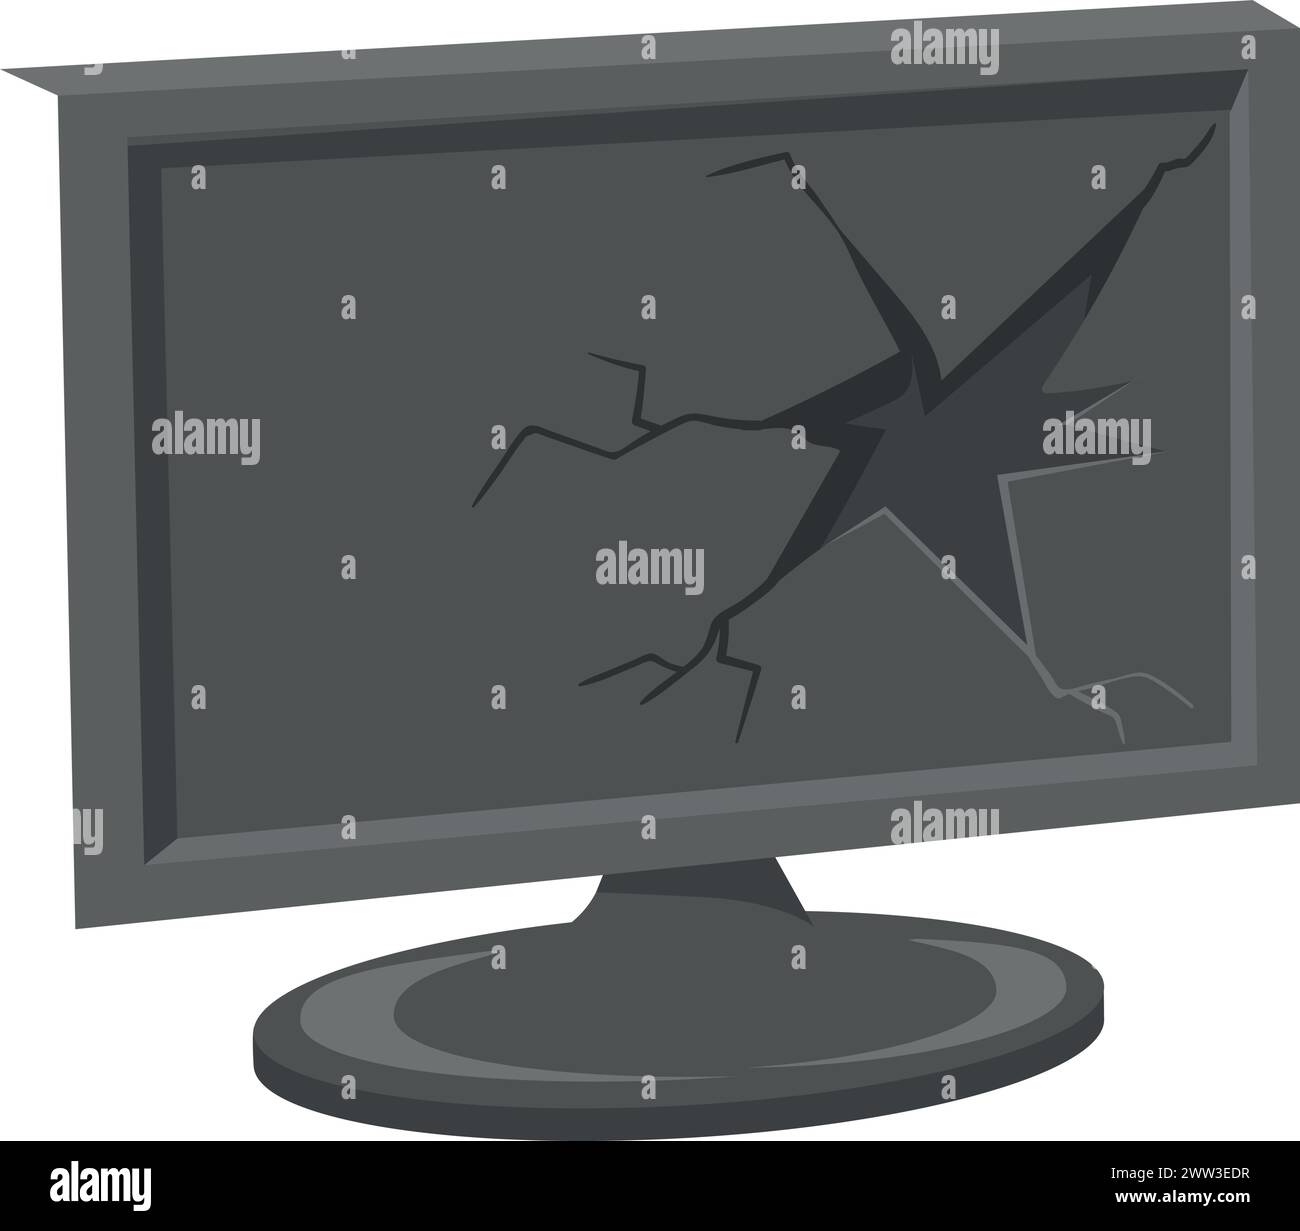 Broken tv with shuttered screen. Electronic garbage cartoon icon isolated on white background Stock Vector